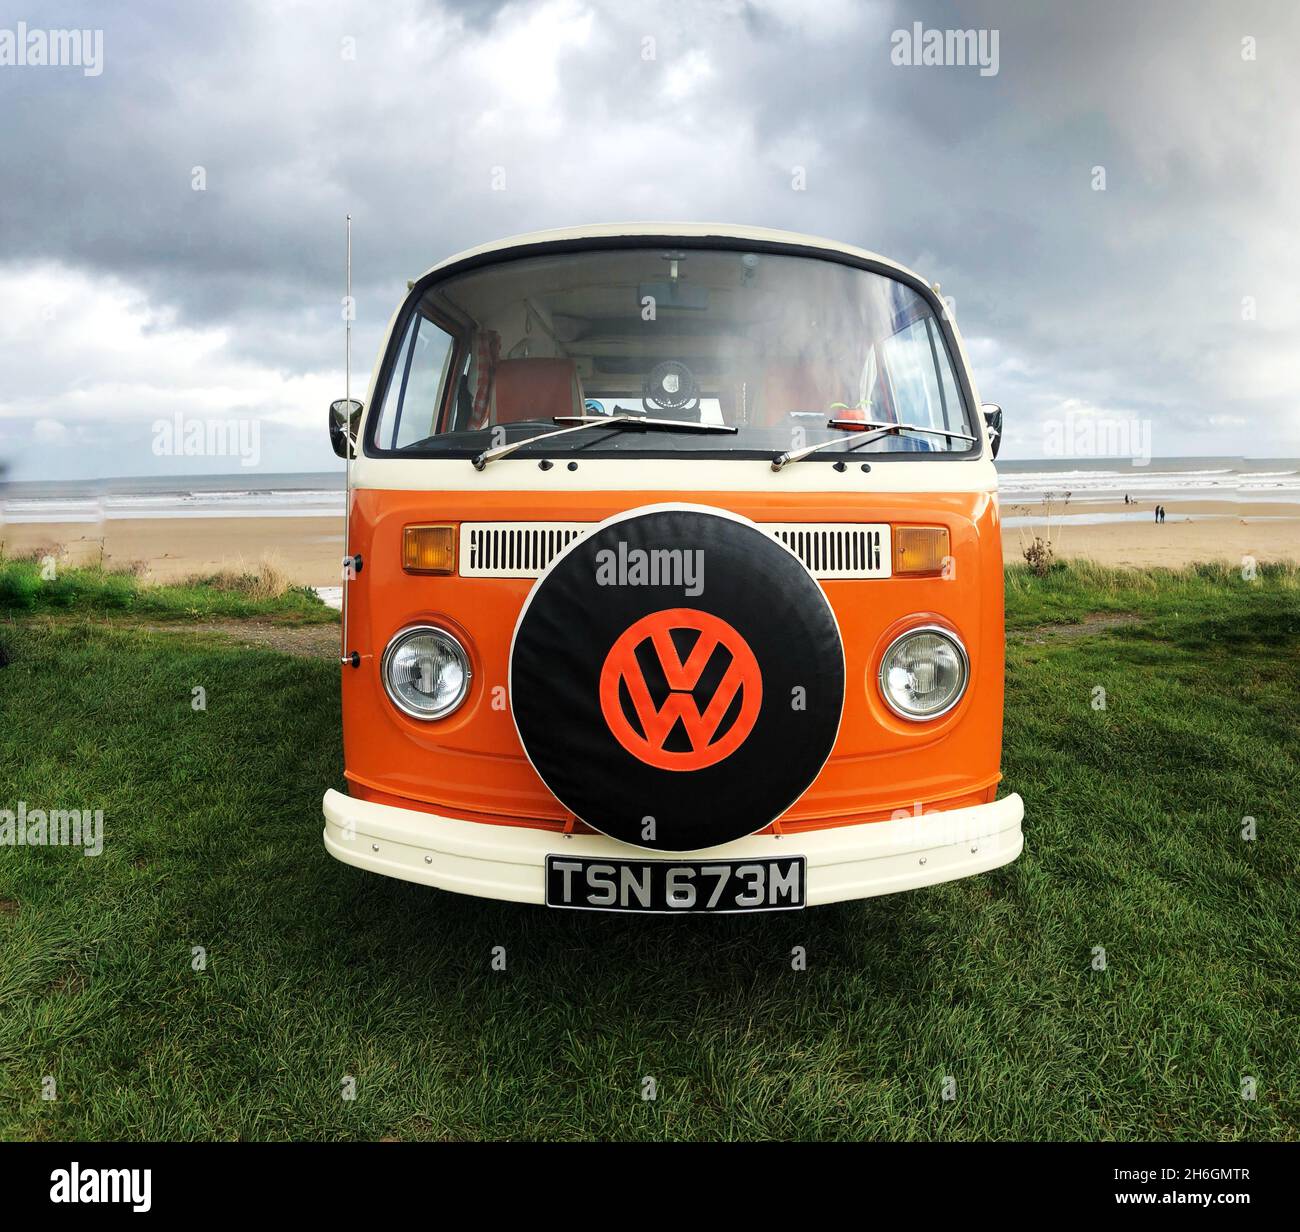 A front view of a classic Volkswagen Orange campervan at the beach with the VW badge on the vehicle tyre cover Stock Photo